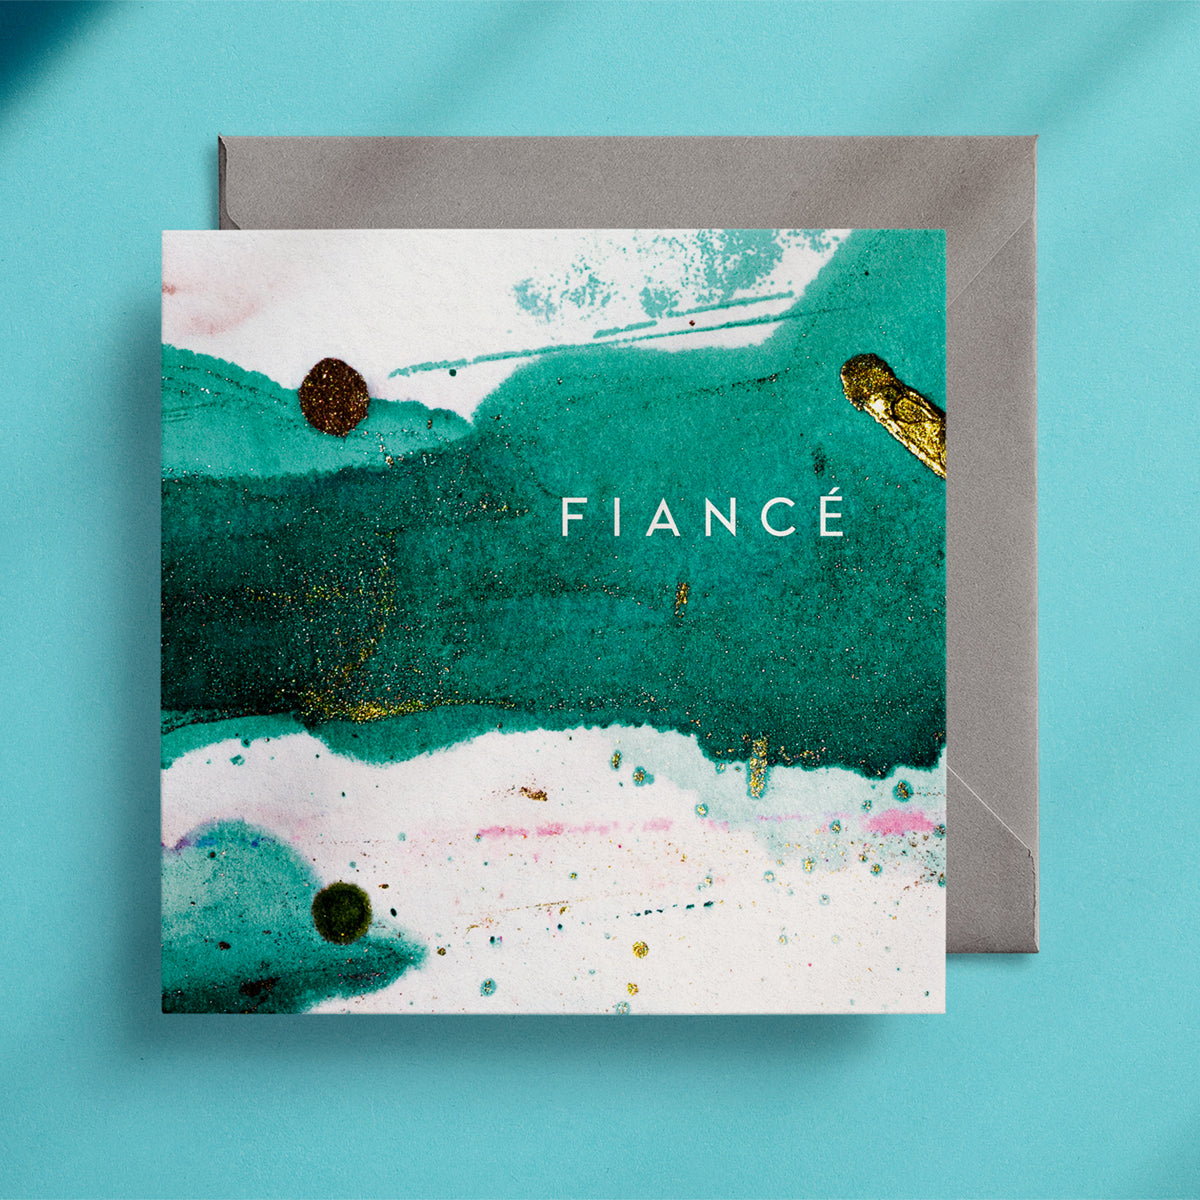 Fiancé - ABSTRACT Greeting Card